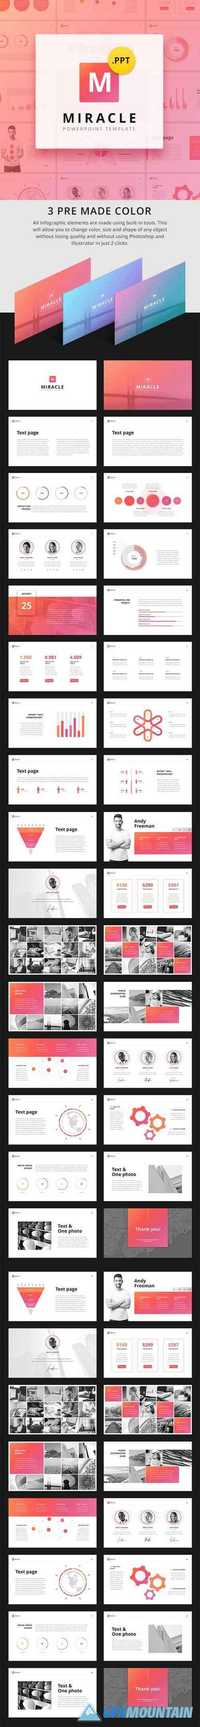 Miracle Modern PowerPoint Template 19683521